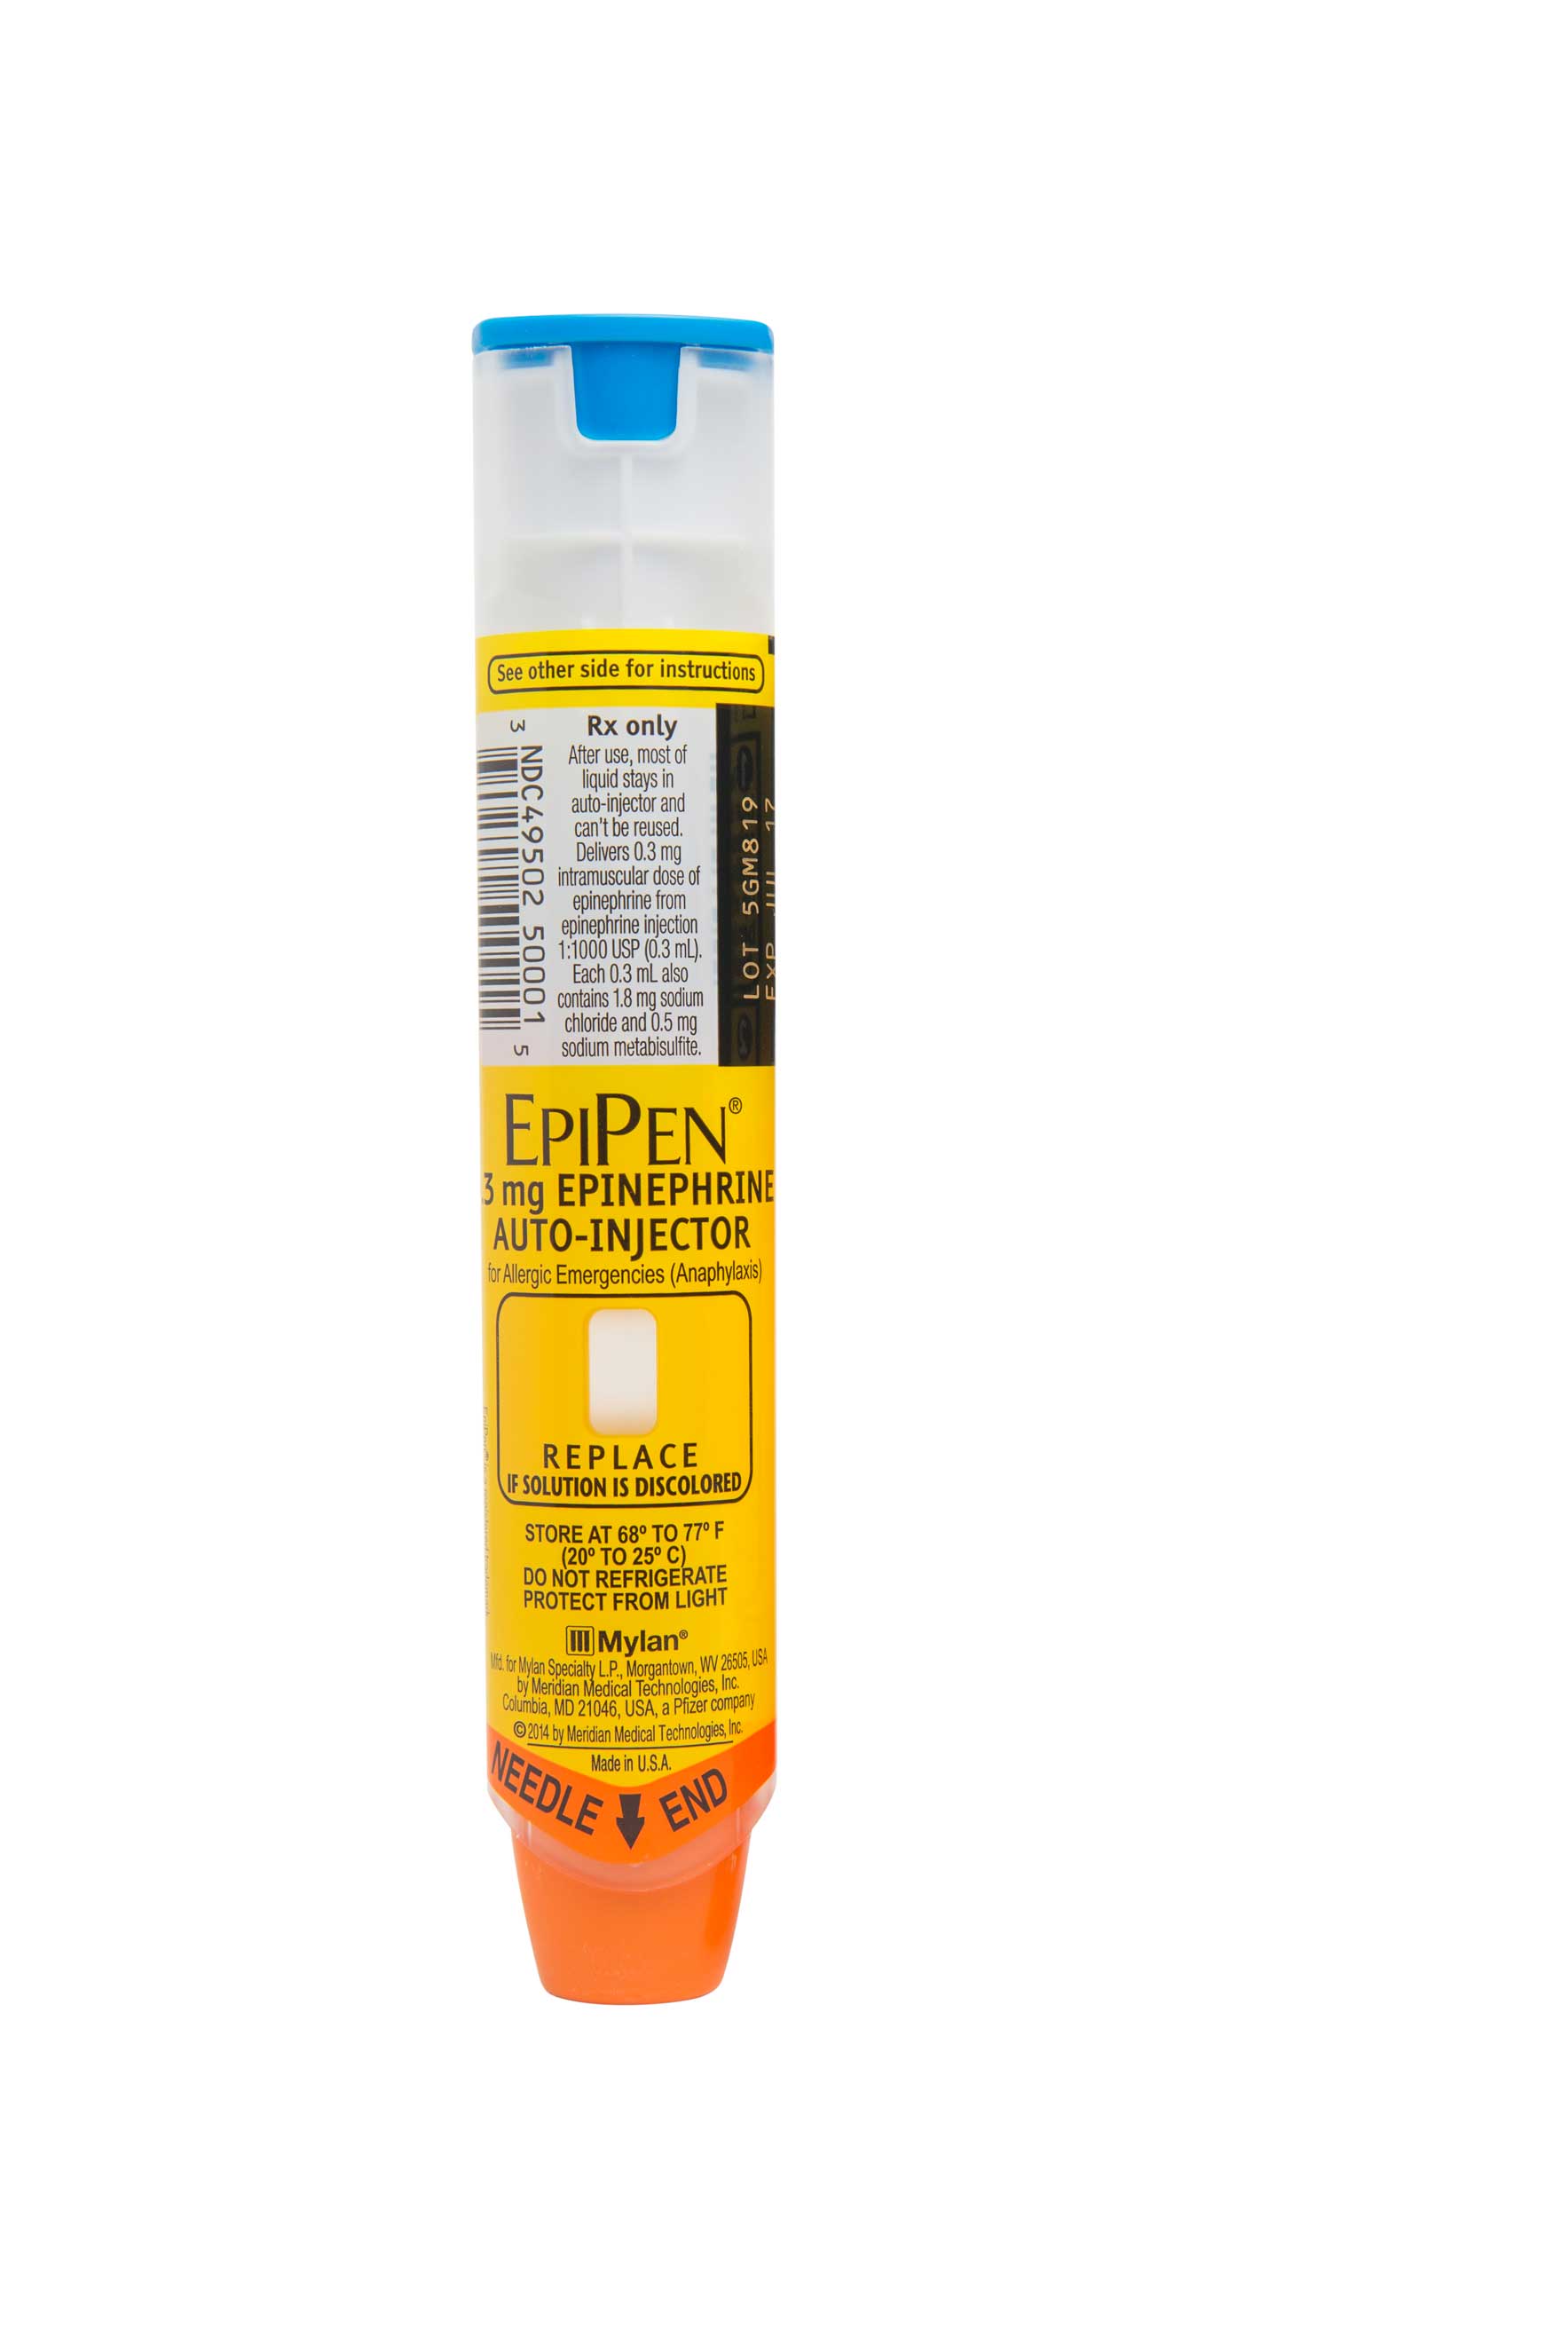 In 2007, when Mylan bought the device, a pair cost $93.88. More than 3.6 million prescriptions were written for EpiPen kits in 2015, according to IMS Health. (Getty Images)